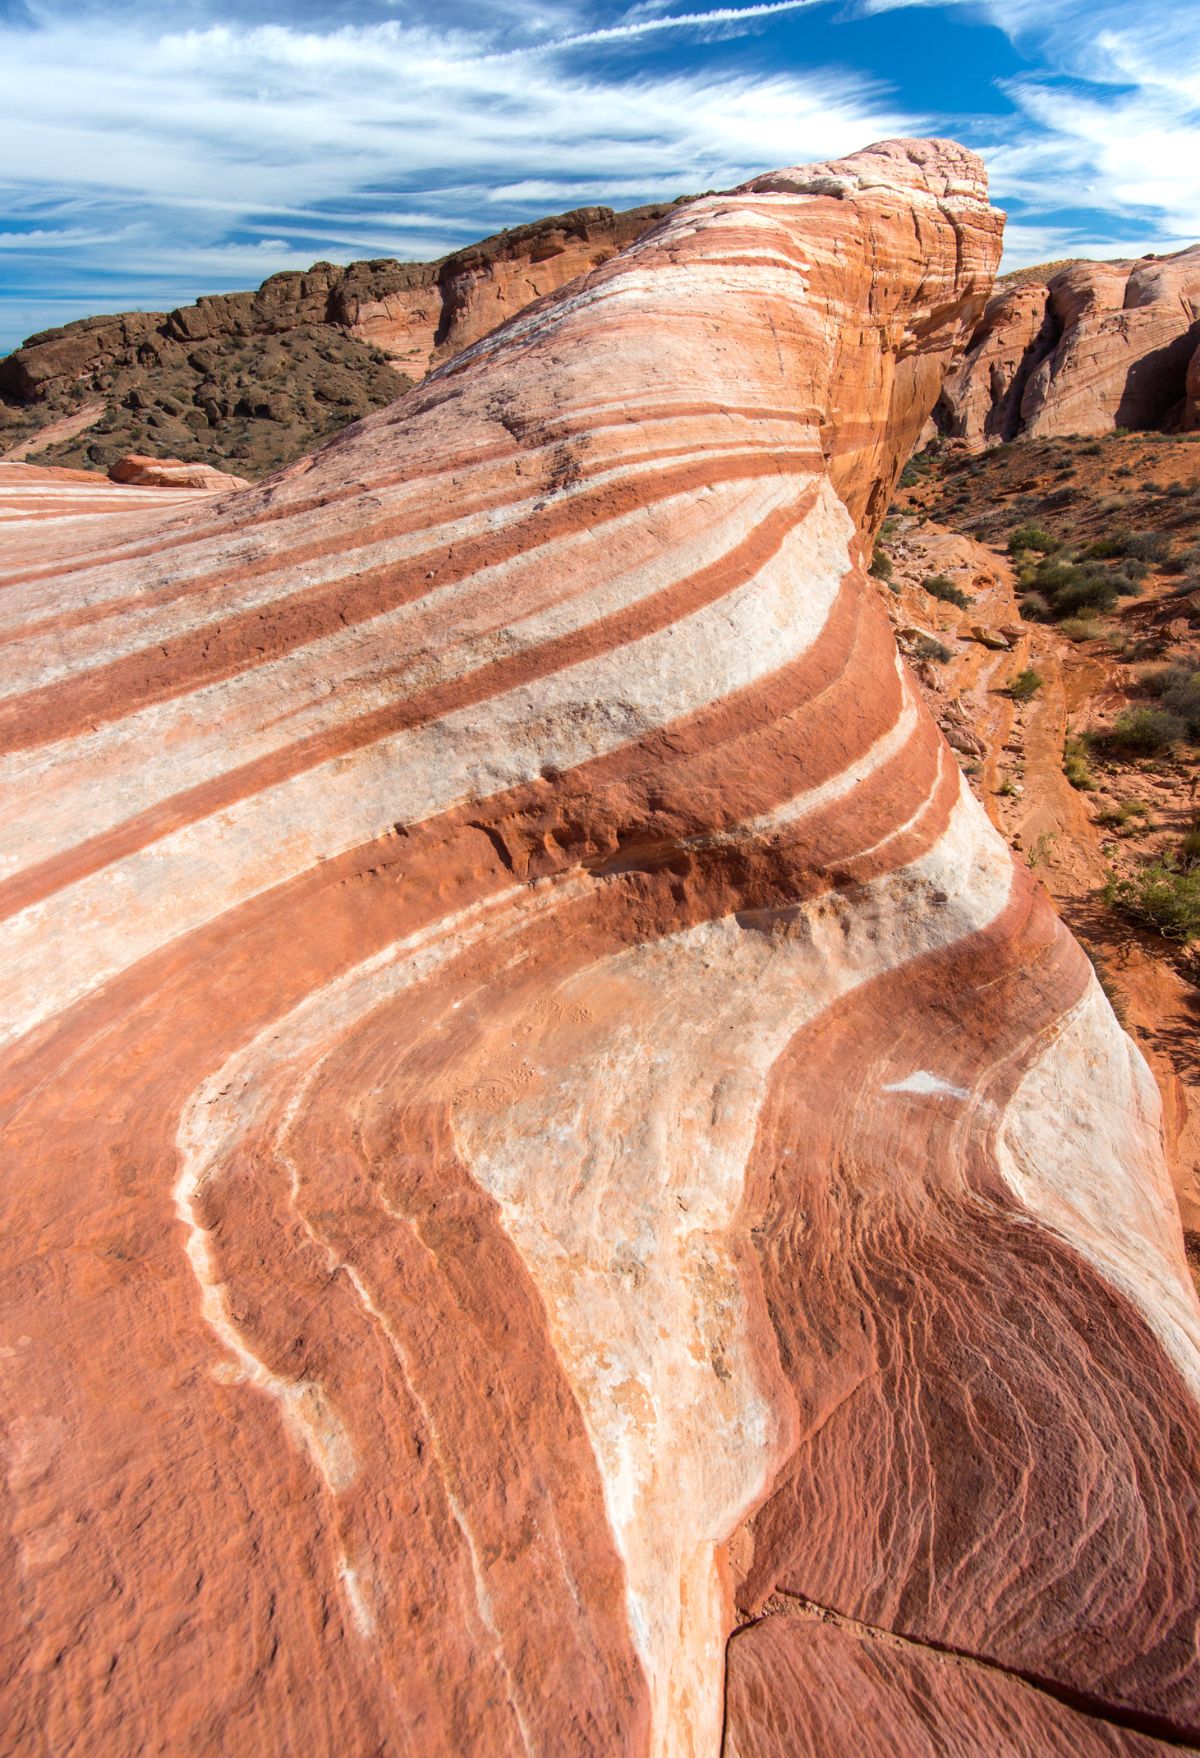 A red and white striped rock formation in Nevada, resembling the vast landscapes found in Utah's national parks.